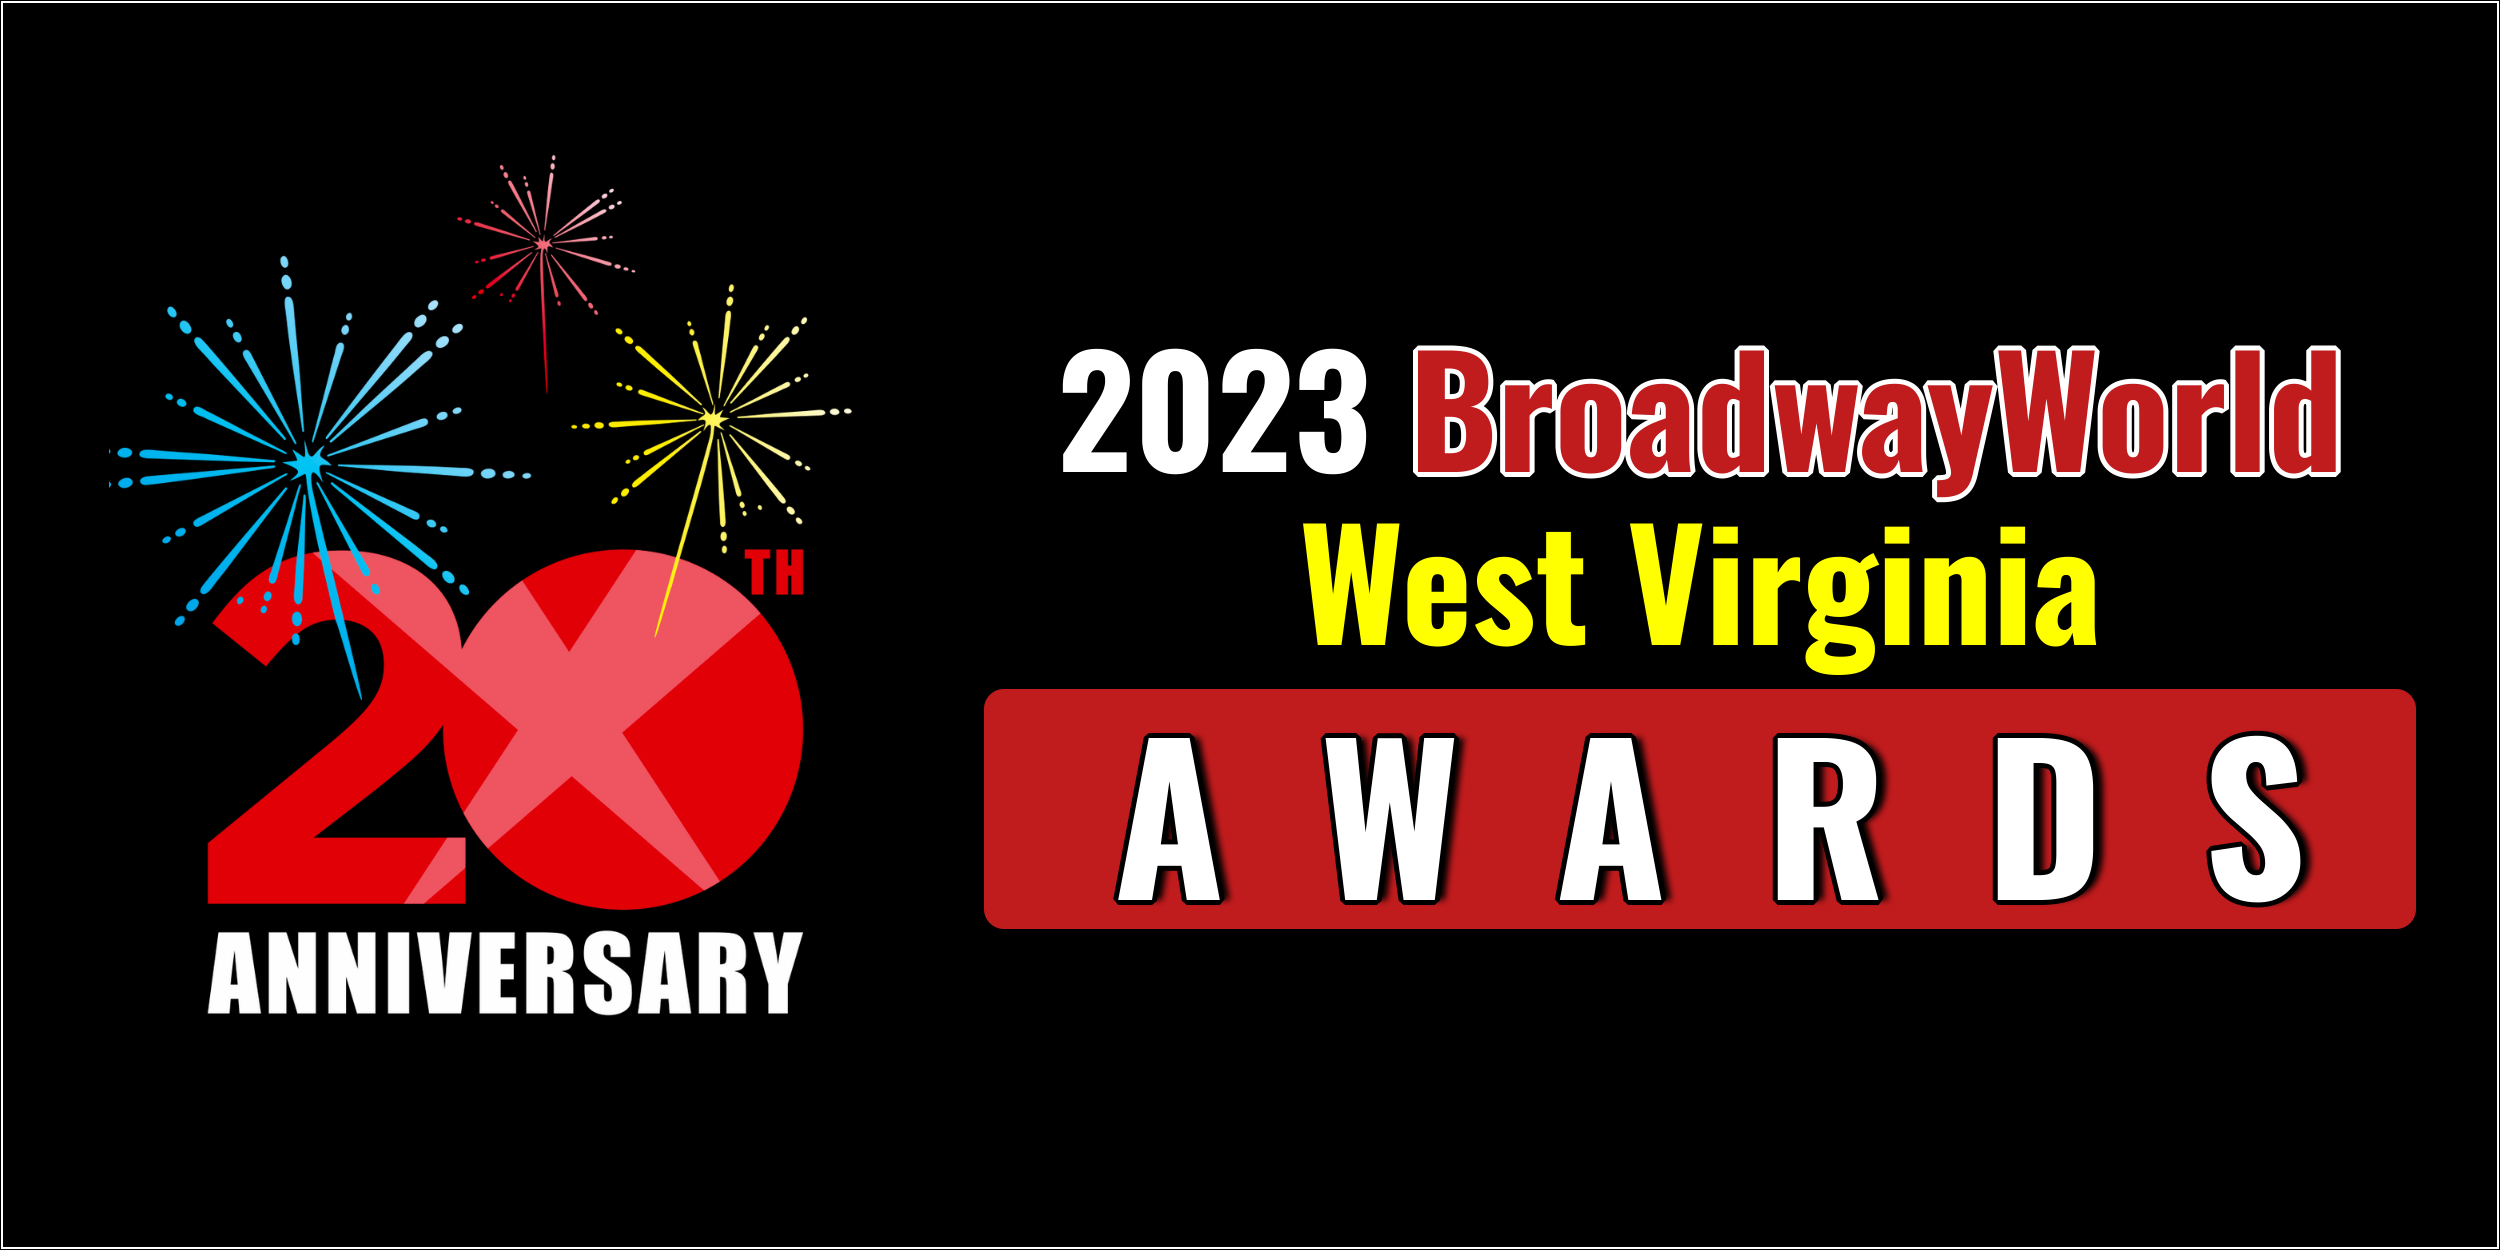 Latest Standings Announced For The 2023 BroadwayWorld West Virginia Awards; TREASURE ISLAND Leads Best Play! 